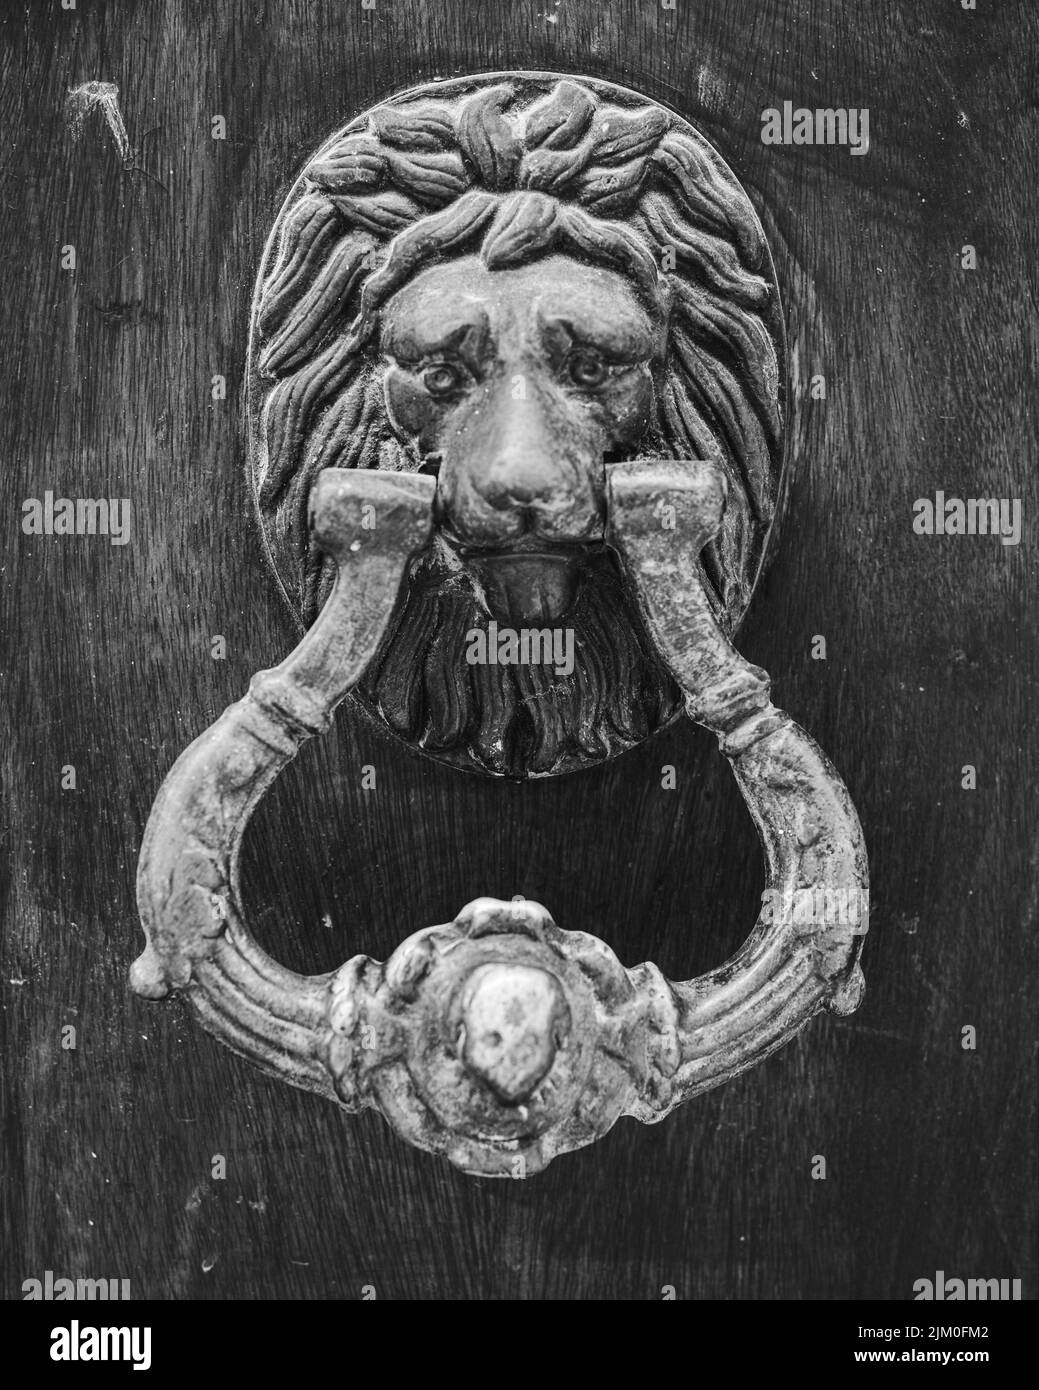 A grayscale of a lion door knocker on a wooden door Stock Photo